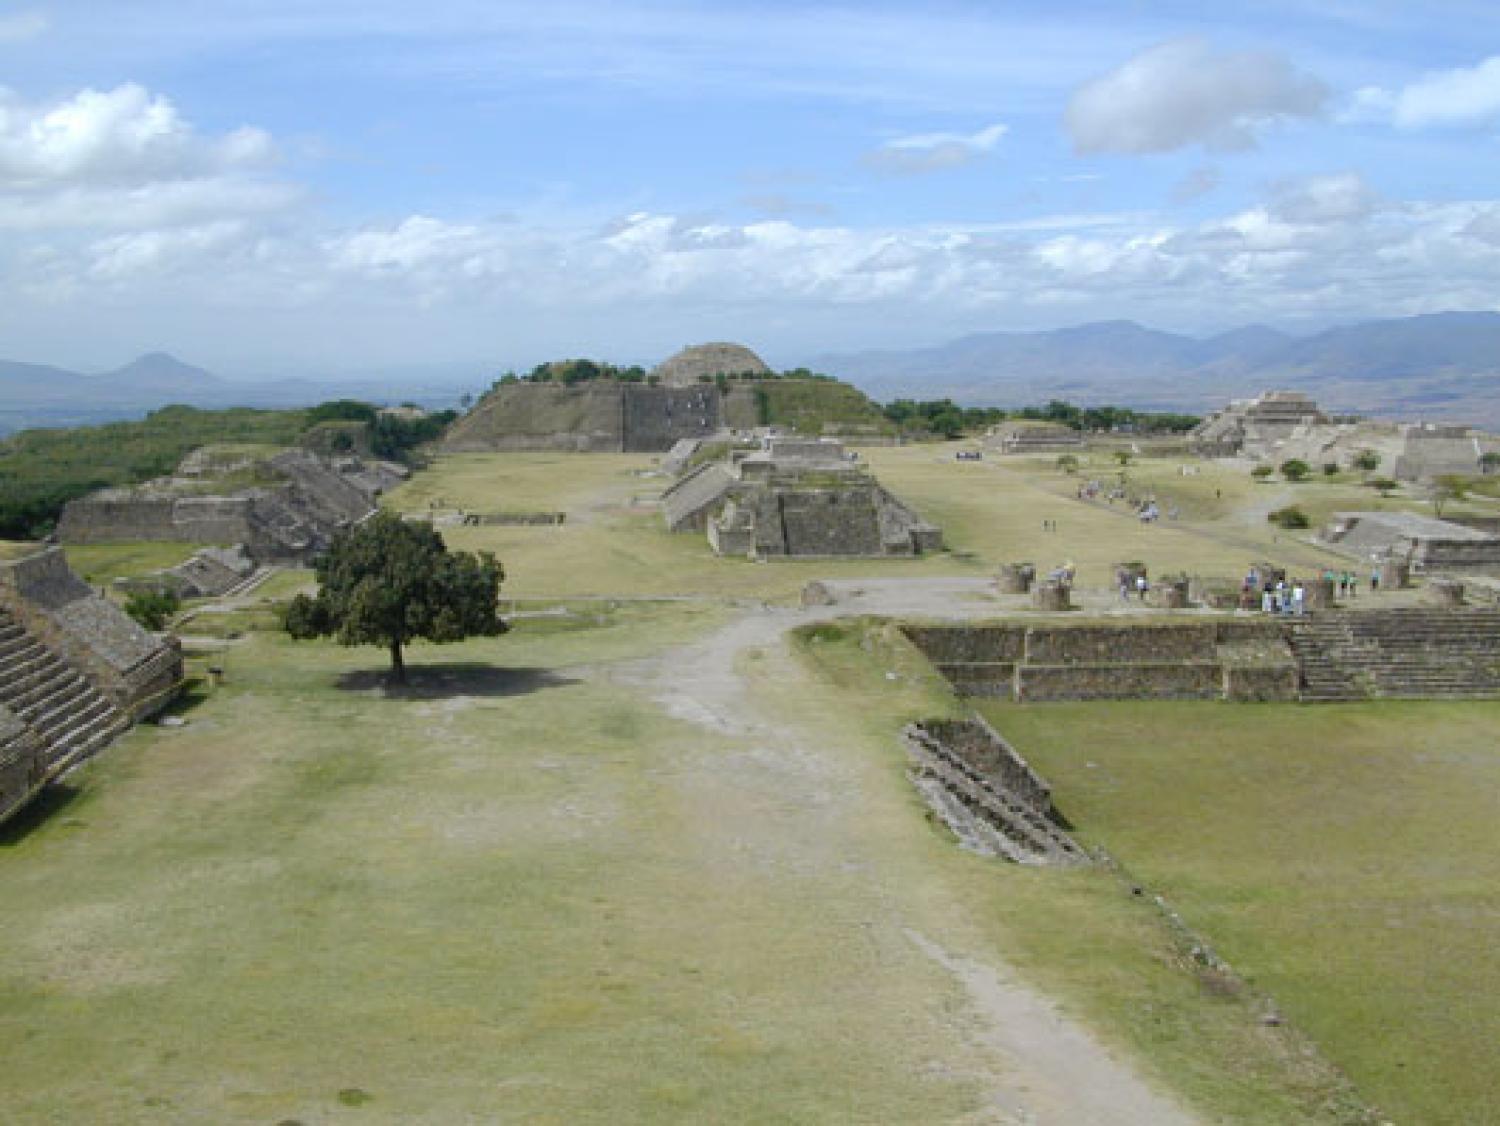 The ceremonial center of the ancient Zapotec city of Monte Alban. Photo by Arthur Joyce.